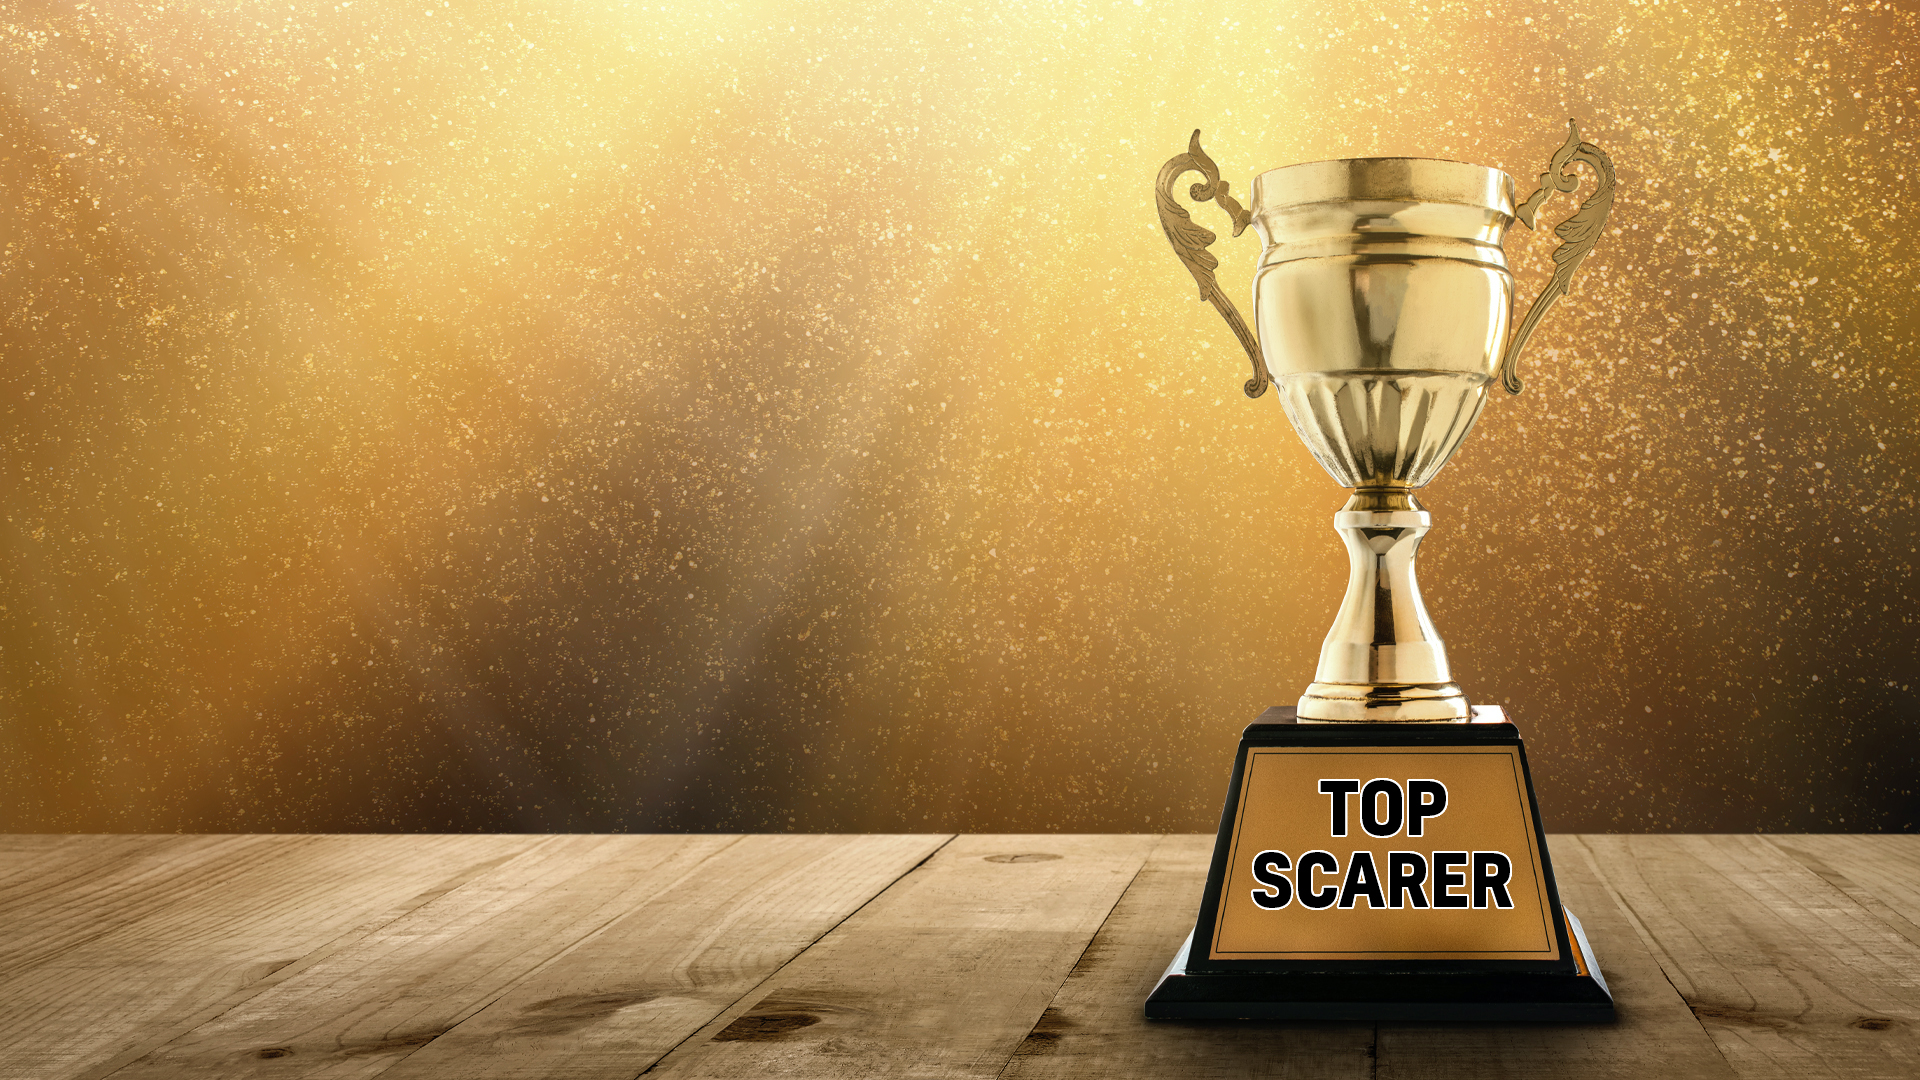 A trophy for 'top scarer'